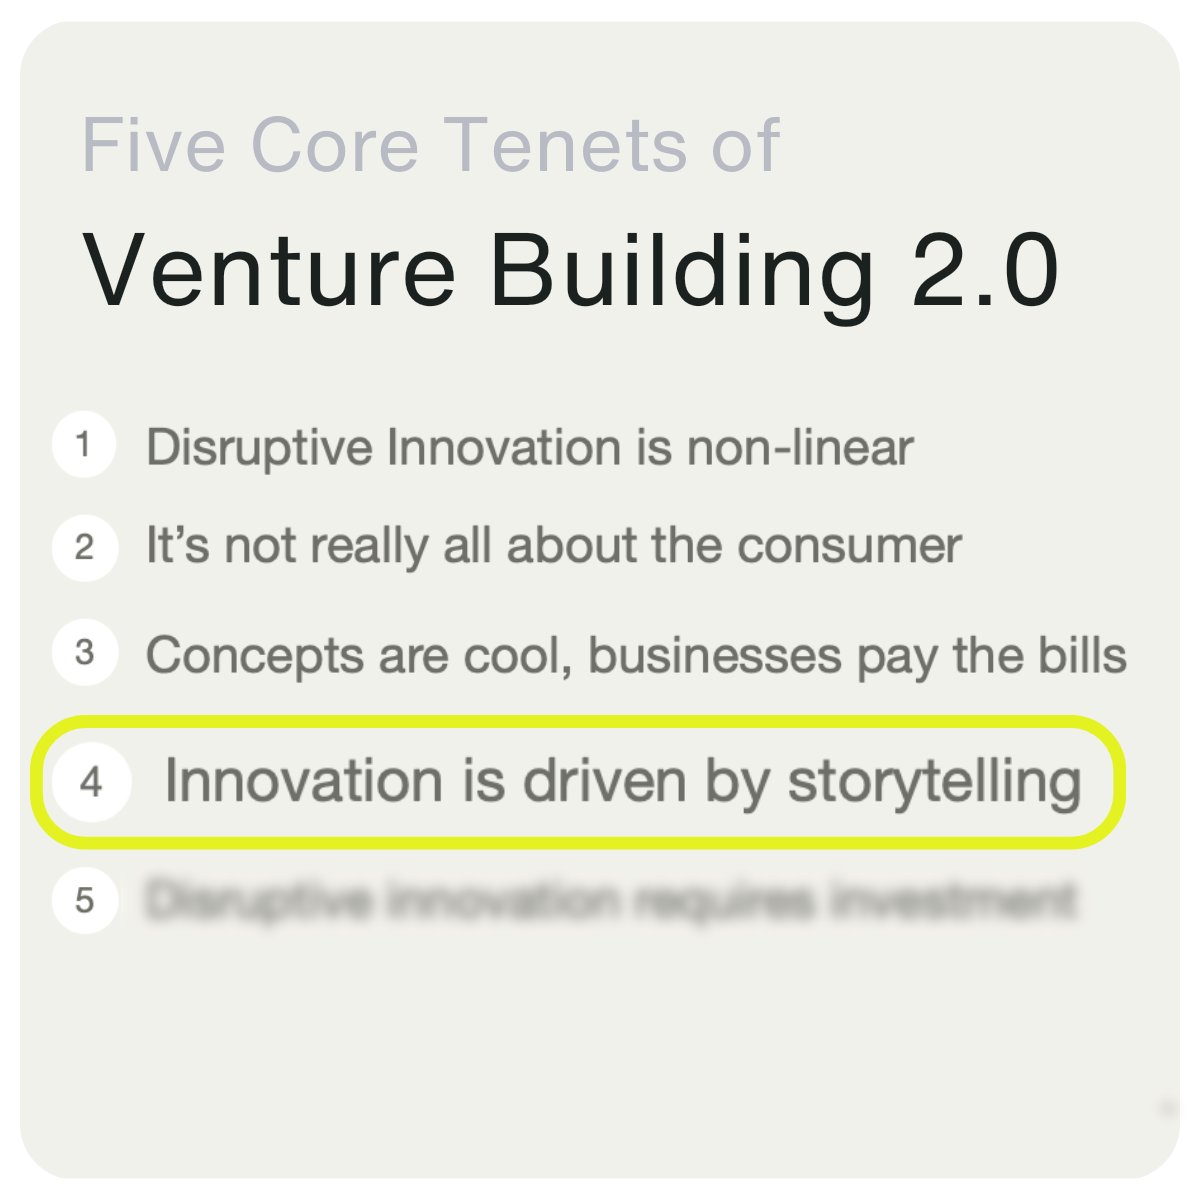 📖 #Storytelling drives #innovation
Merging technical expertise with right-brain dominance—creativity, intuition, and emotional intelligence— is becoming increasingly vital, marking a new #competitiveadvantage.
--
Grow your modern #VentureBuilding process: hubs.li/Q02vcKNm0